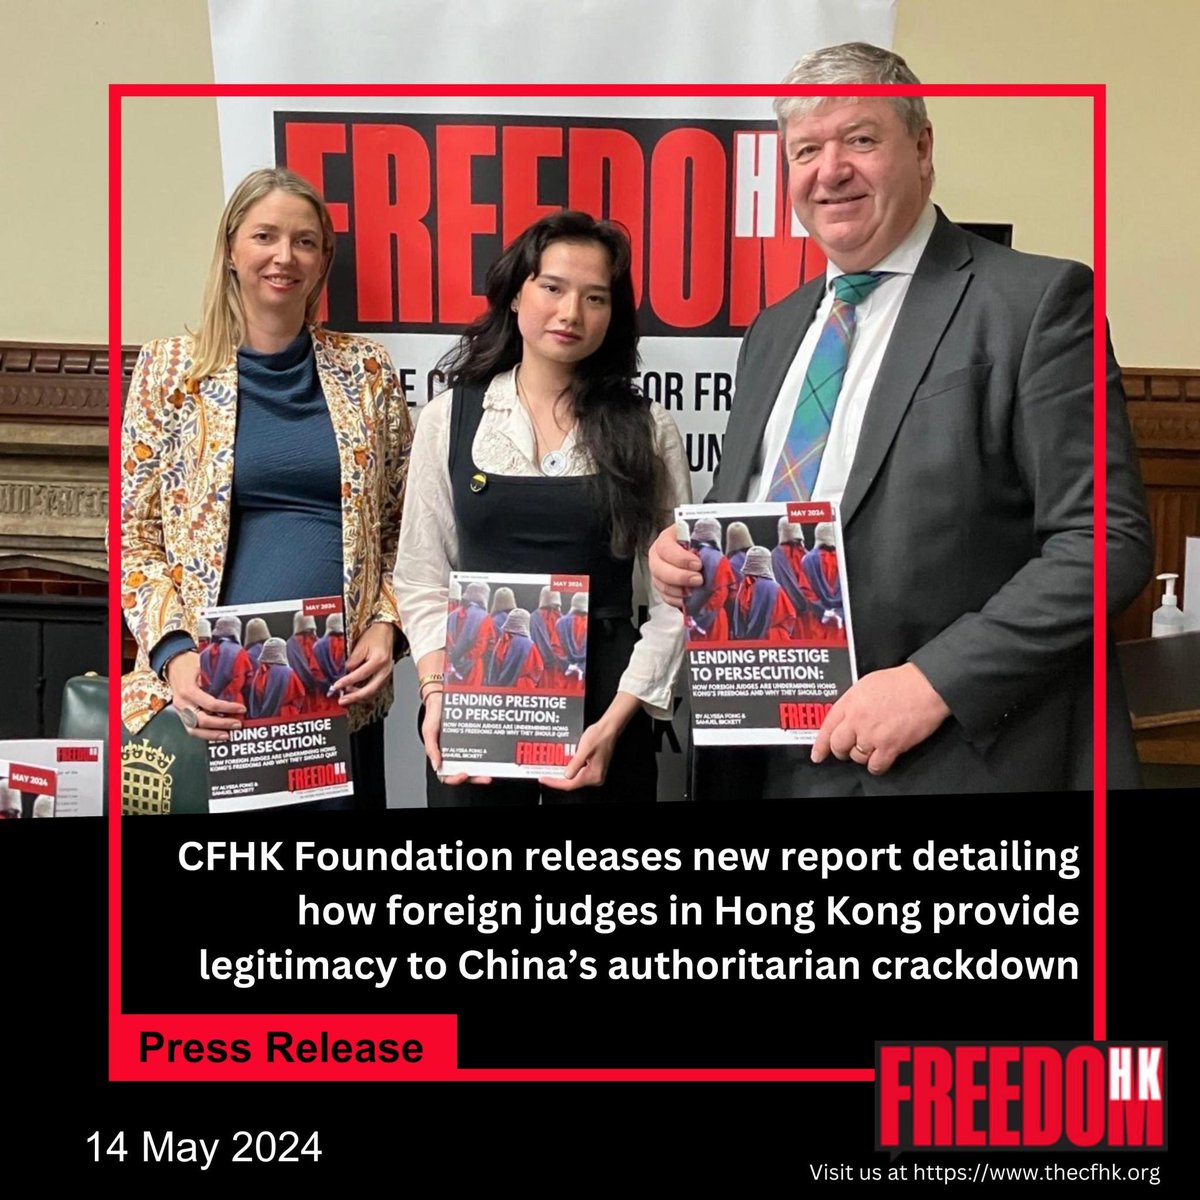 🚨PRESS RELEASE: CFHK Foundation Releases New Report Detailing How Foreign Judges in Hong Kong Provide Legitimacy to China’s Authoritarian Crackdown Authors: @Alyssa__Fong & @SamuelBickett Read More ⬇️ thecfhk.org/post/press-rel…